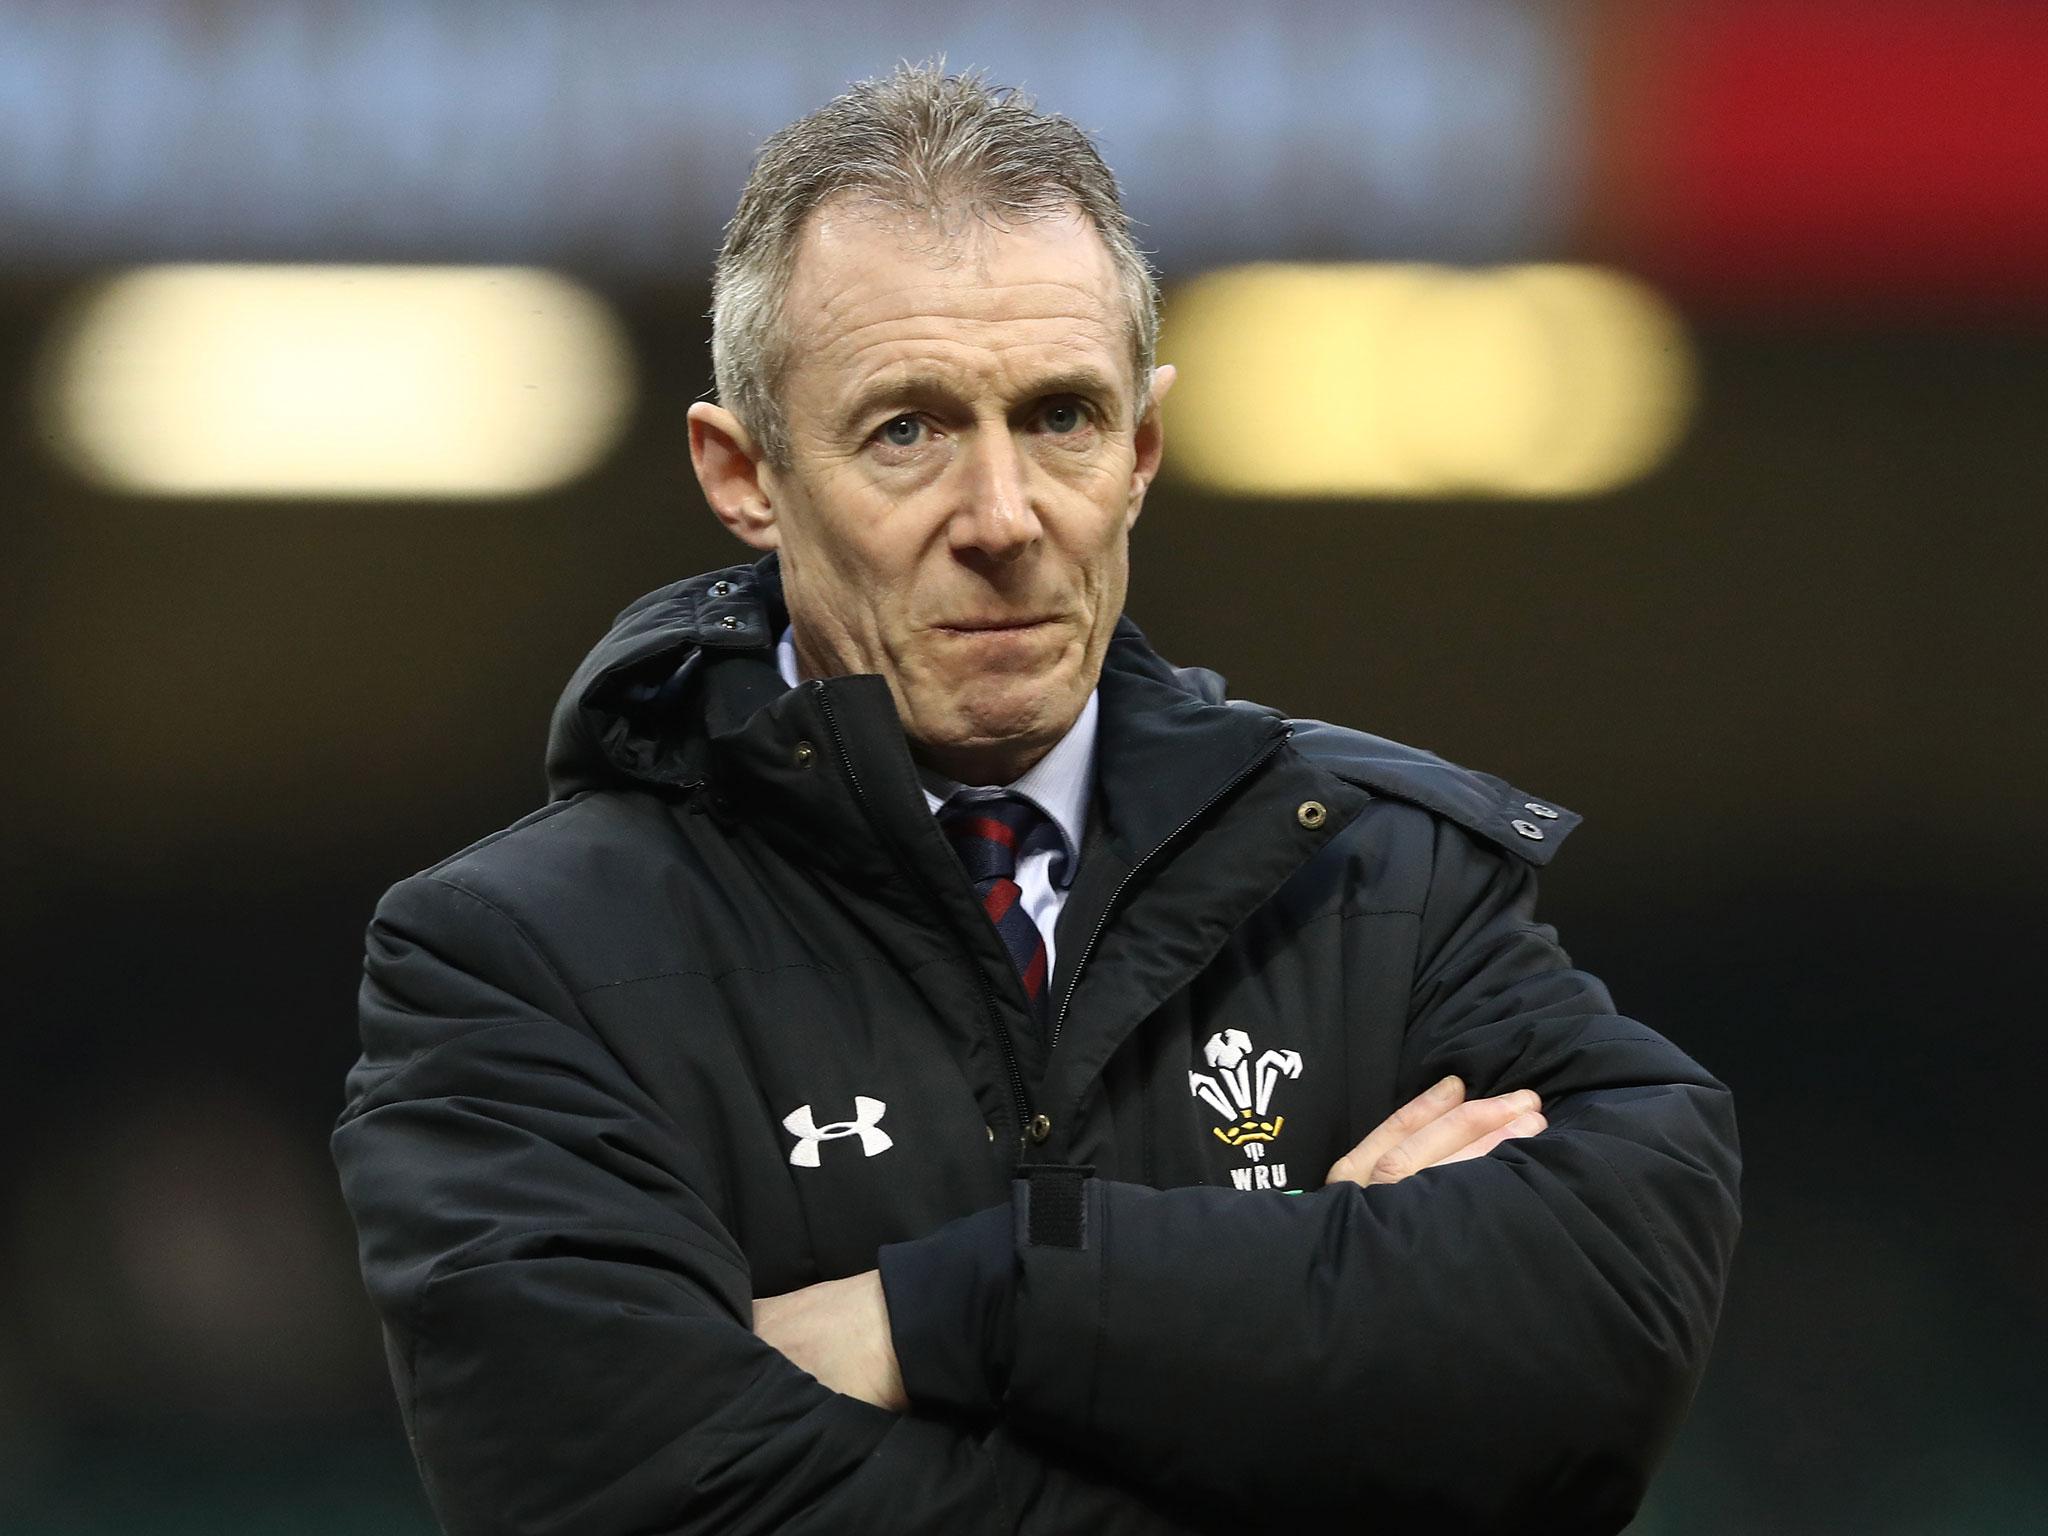 Wales coach Rob Howley rued his side's inability to hold on in the final stages against England